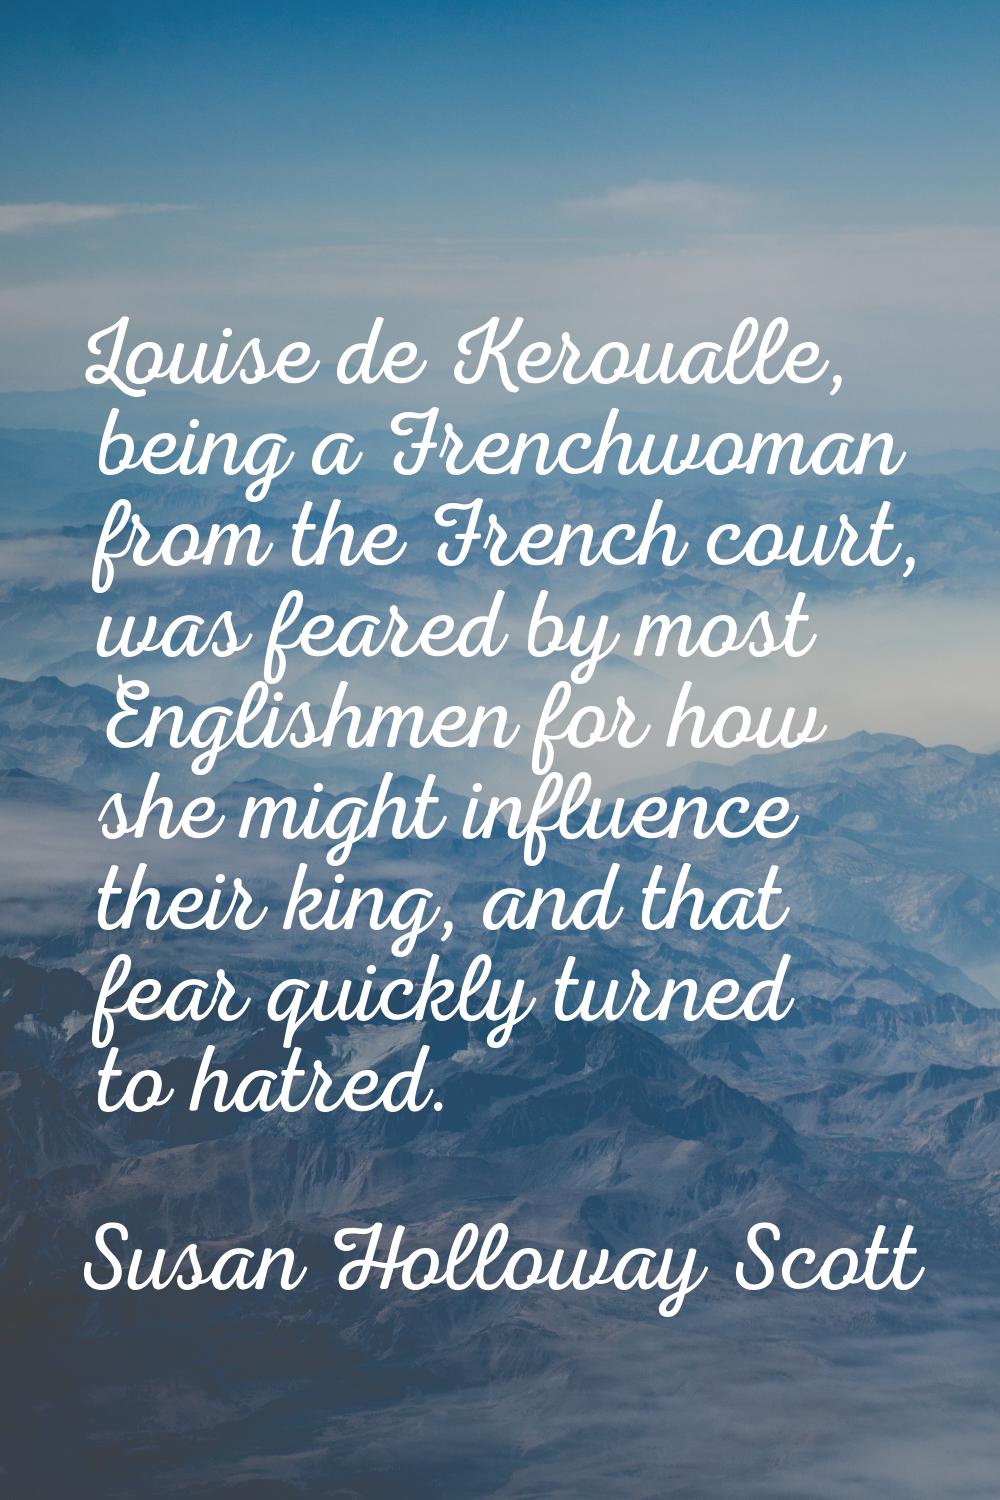 Louise de Keroualle, being a Frenchwoman from the French court, was feared by most Englishmen for h